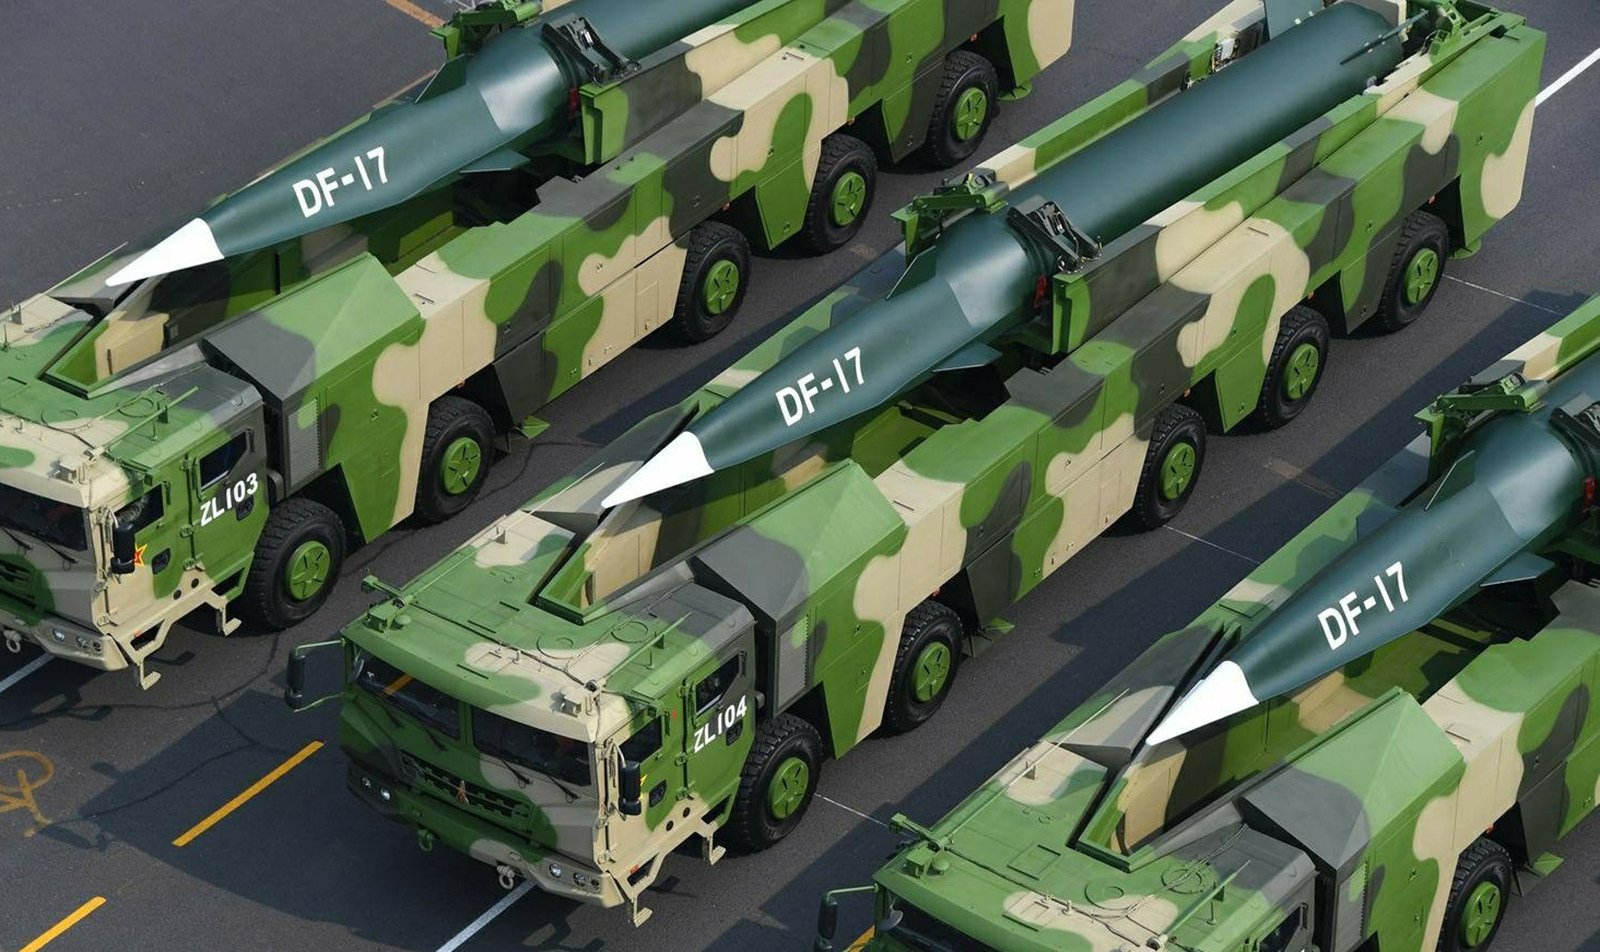 China’s DF-17 medium-range ballistic missile, which is equipped with a hypersonic glide vehicle, was revealed during a military parade in 2019. Photo: Weibo